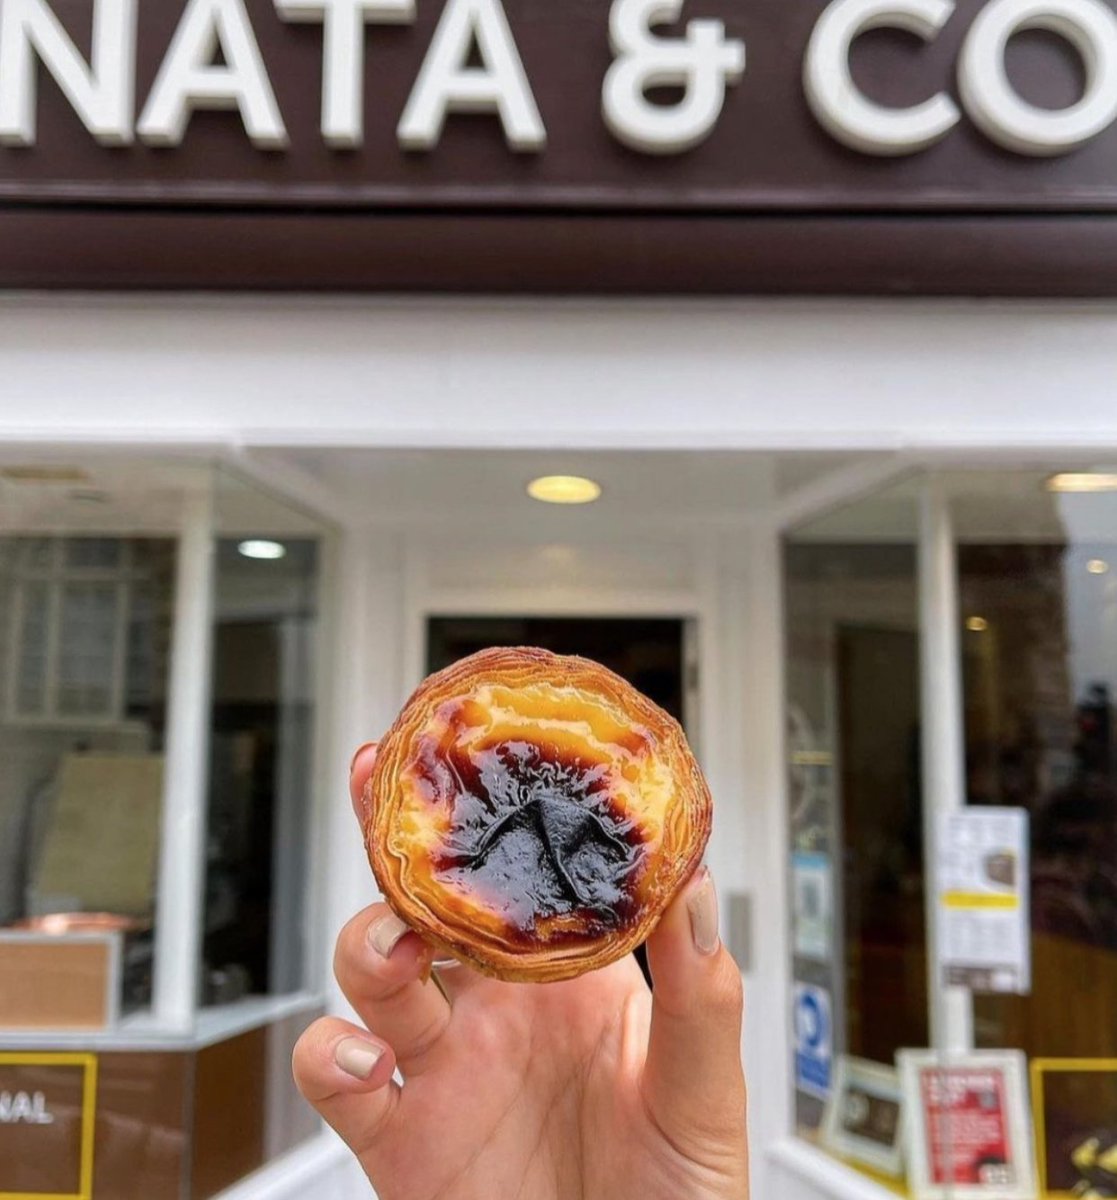 Looking for a mid-week treat? We've got you covered 😉

#Cardiff #CardiffCity #CardiffBay #Wales #CardiffByTheSea #CardiffUniversity #CardiffUni #Food #Foodie #Yummy #Foodgasm #Portuguese #Portugal #PasteldeNata